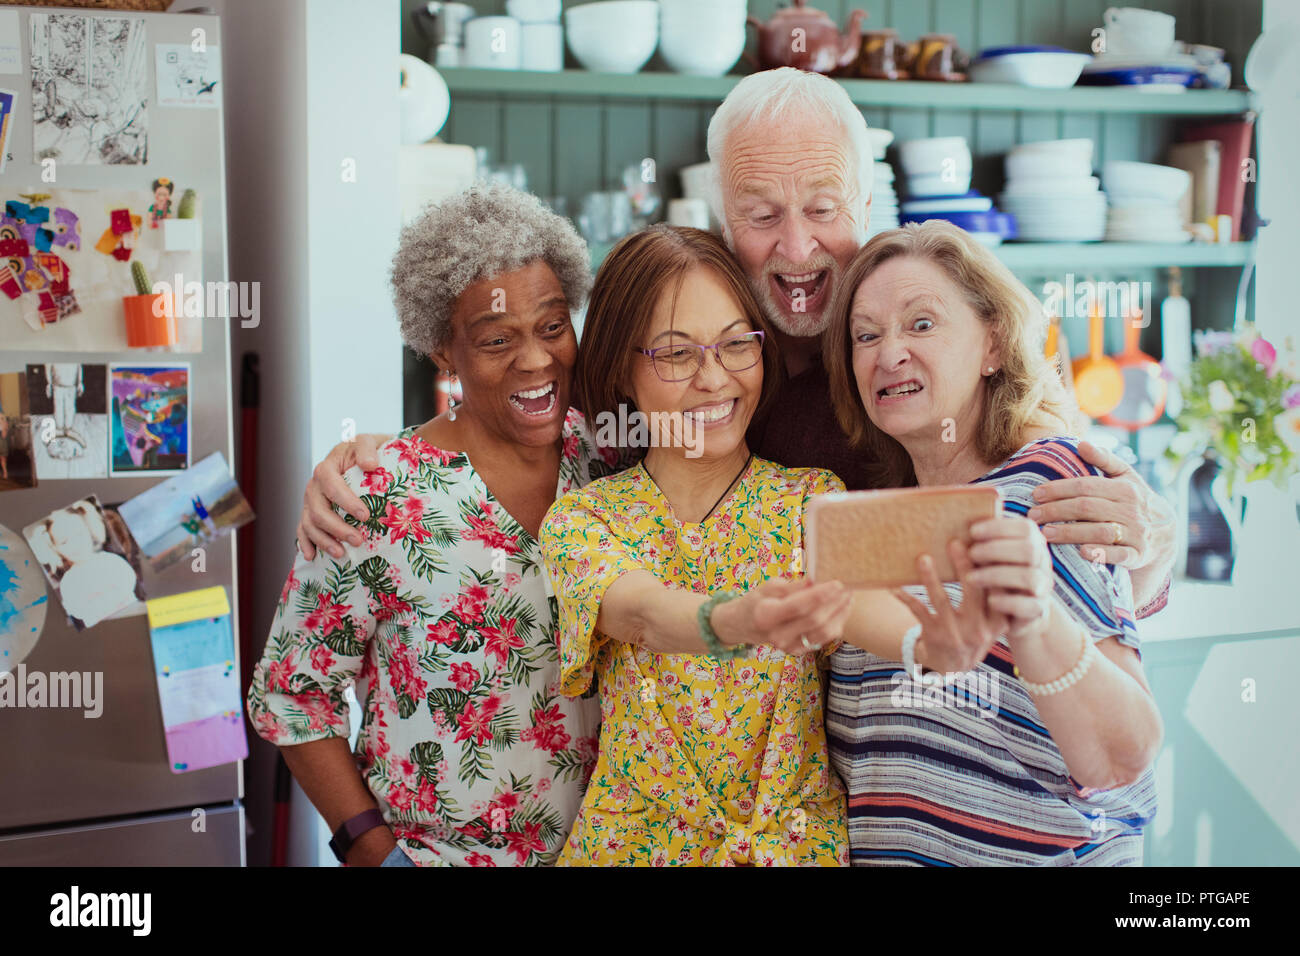 Happy, playful active seniors taking selfie with camera phone, making silly faces Stock Photo